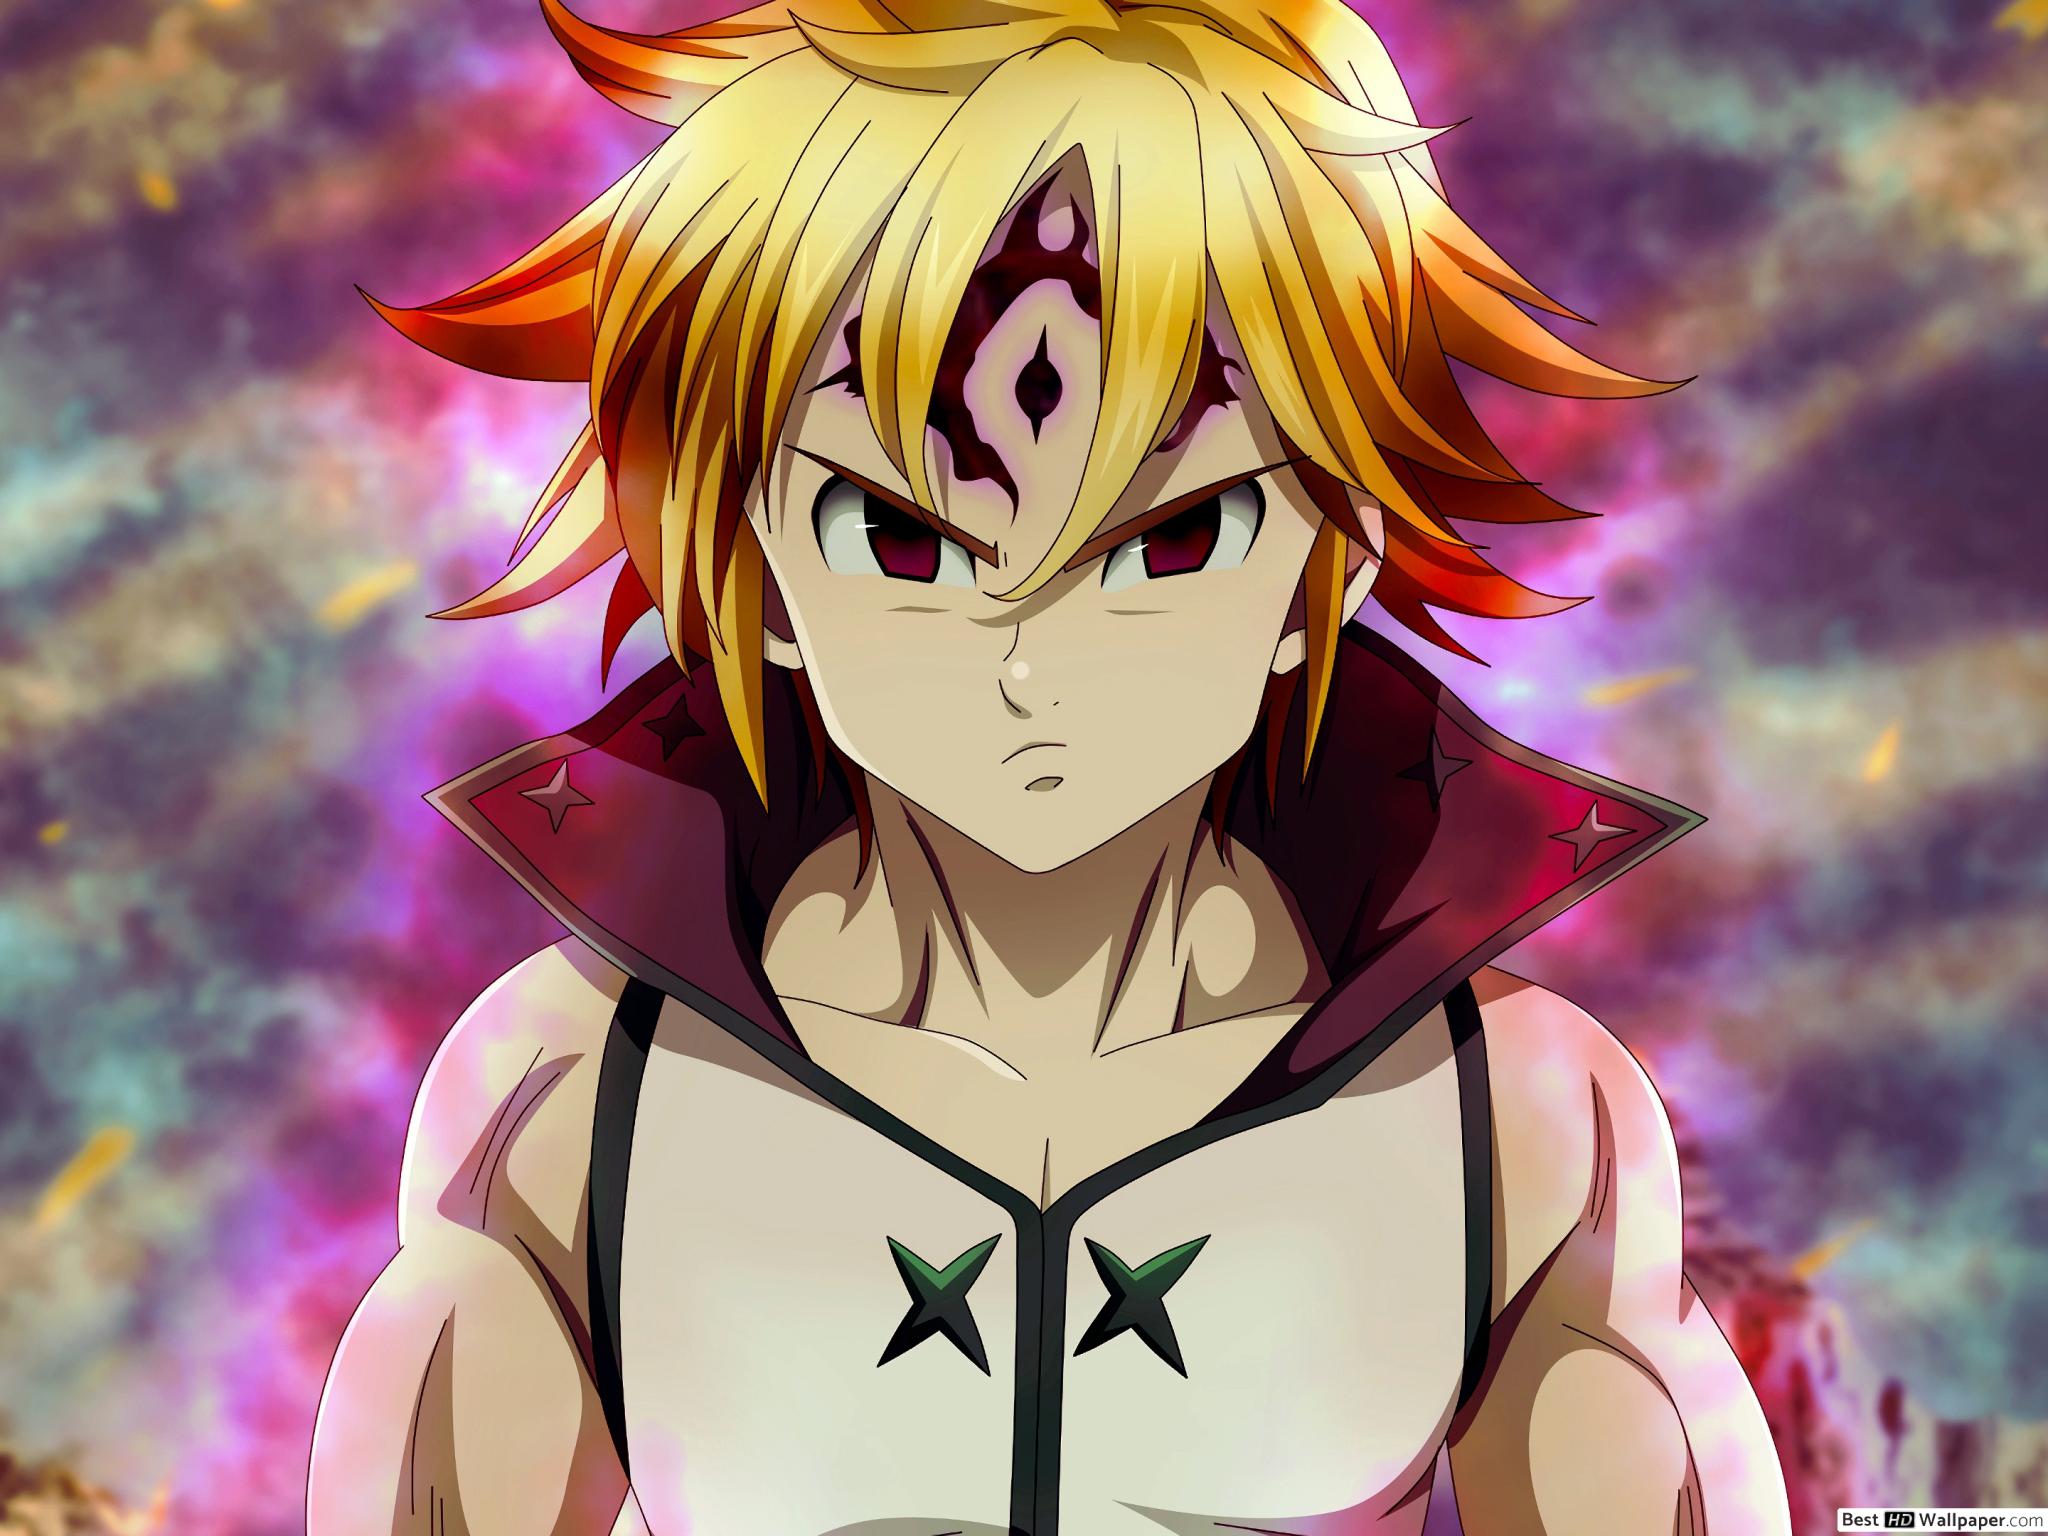 Wallpaper manga, King, Nanatsu no Taizai, The seven deadly sins, the king  of the fairies for mobile and desktop, section сёнэн, resolution 1920x1080  - download